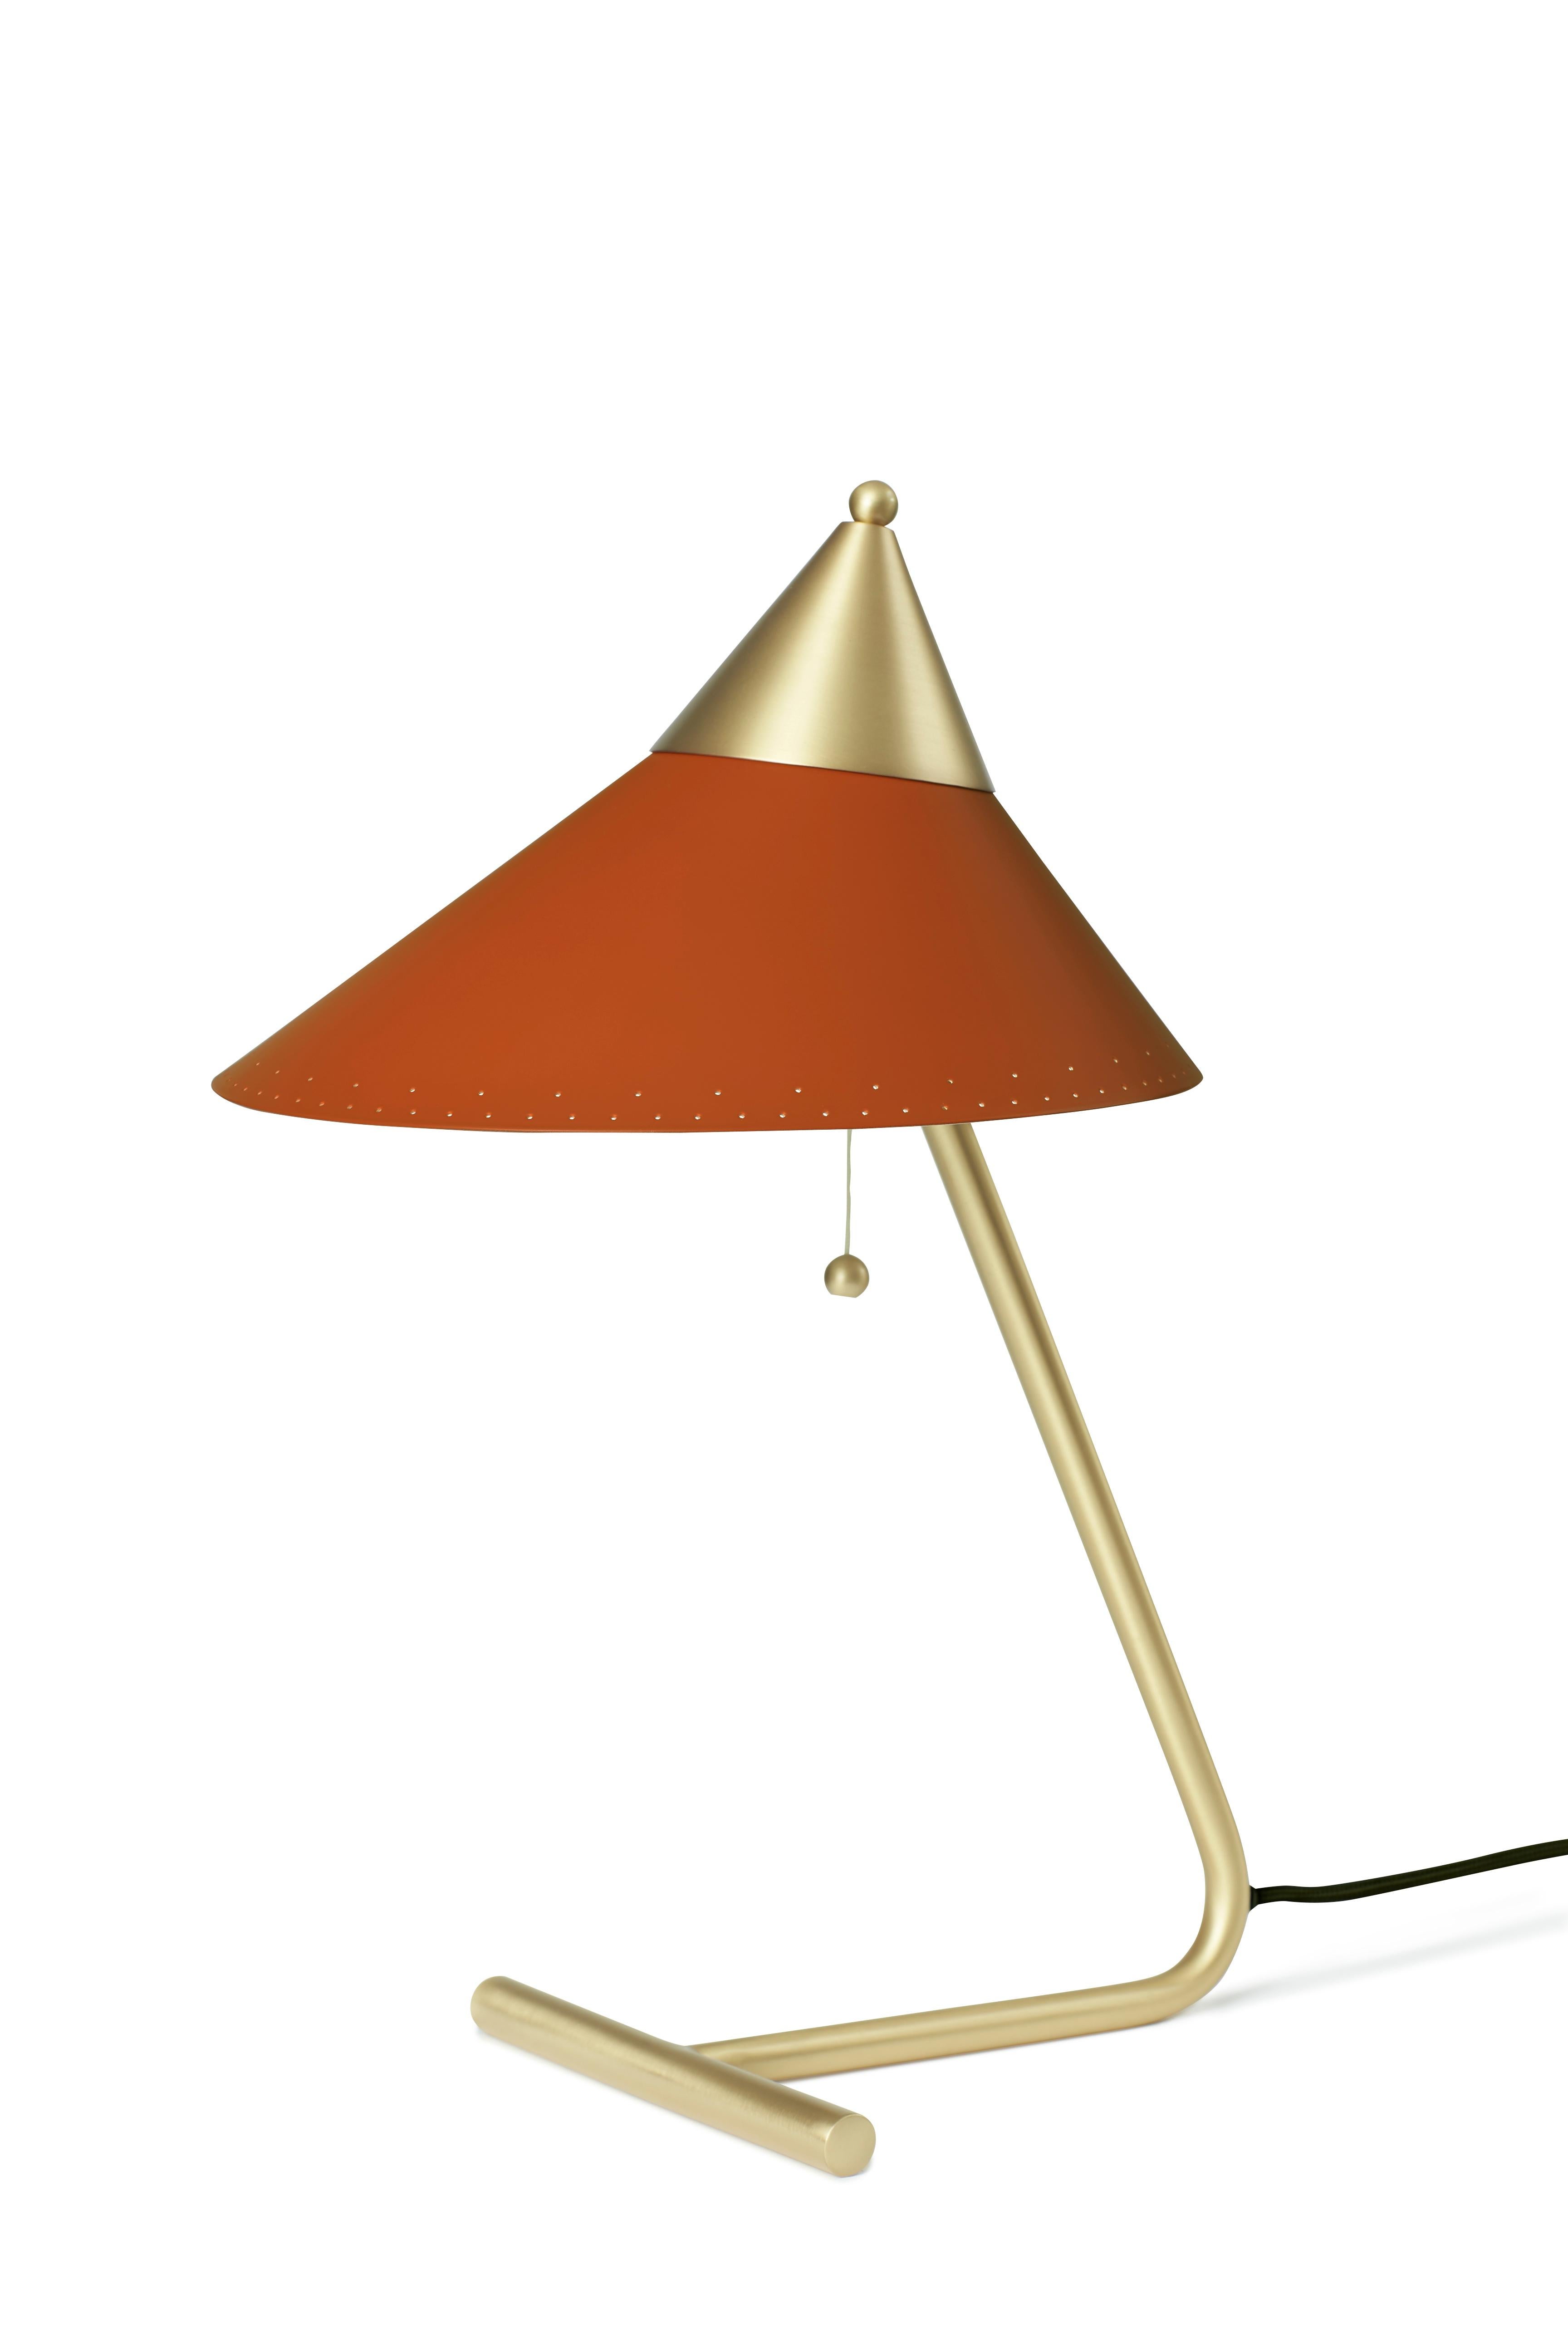 For Sale: Red (Rusty Red) Brass Top Table Lamp, by Svend Aage Holm Sorensen from Warm Nordic